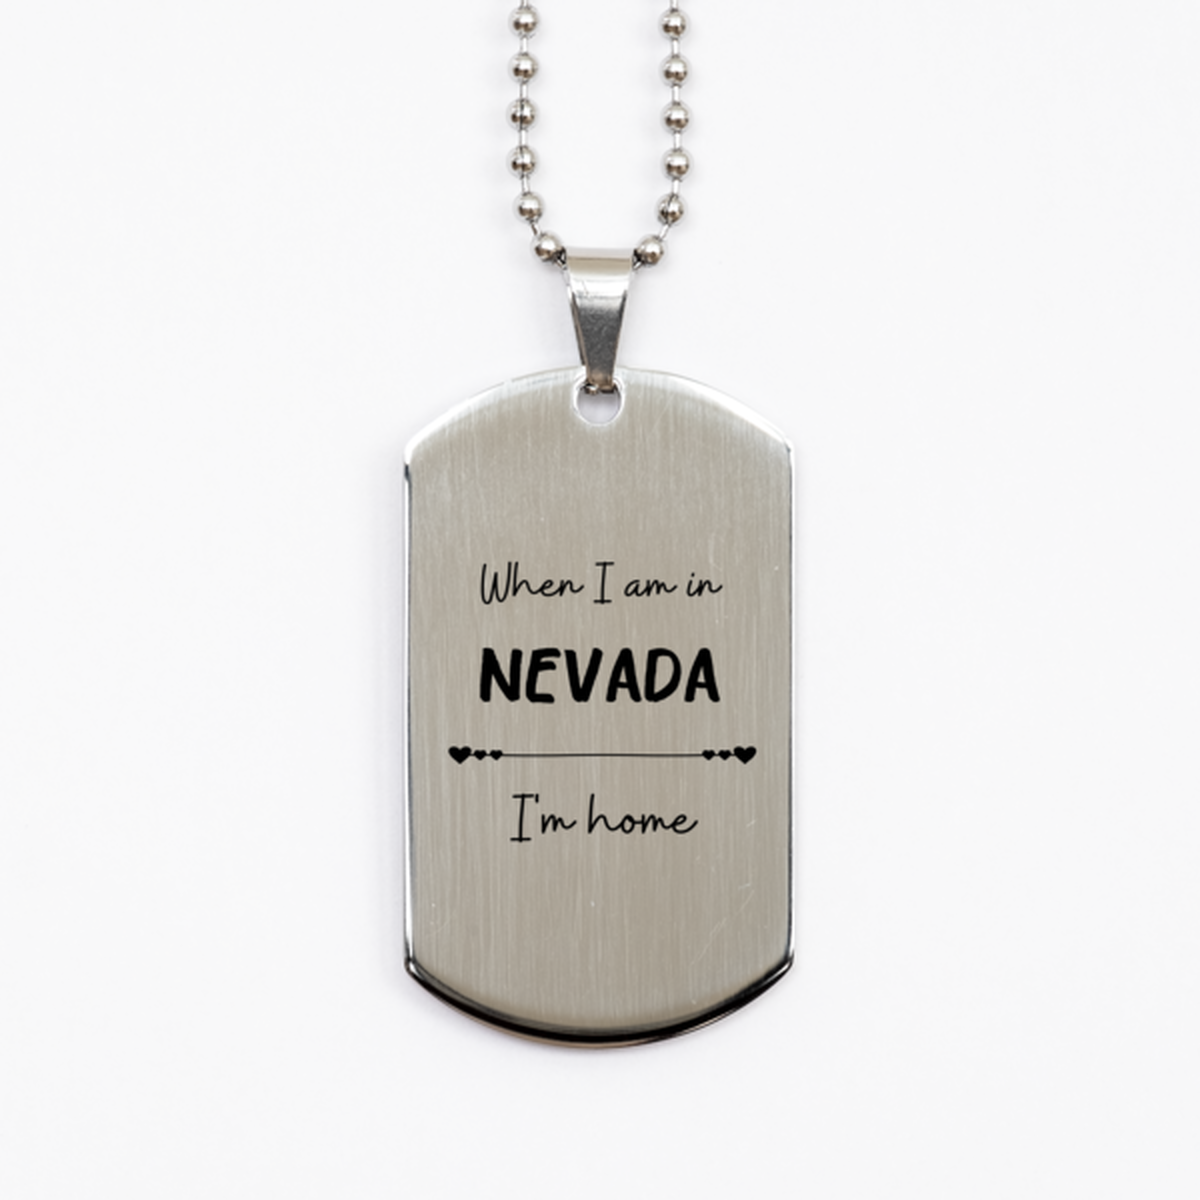 When I am in Nevada I'm home Silver Dog Tag, Cheap Gifts For Nevada, State Nevada Birthday Gifts for Friends Coworker